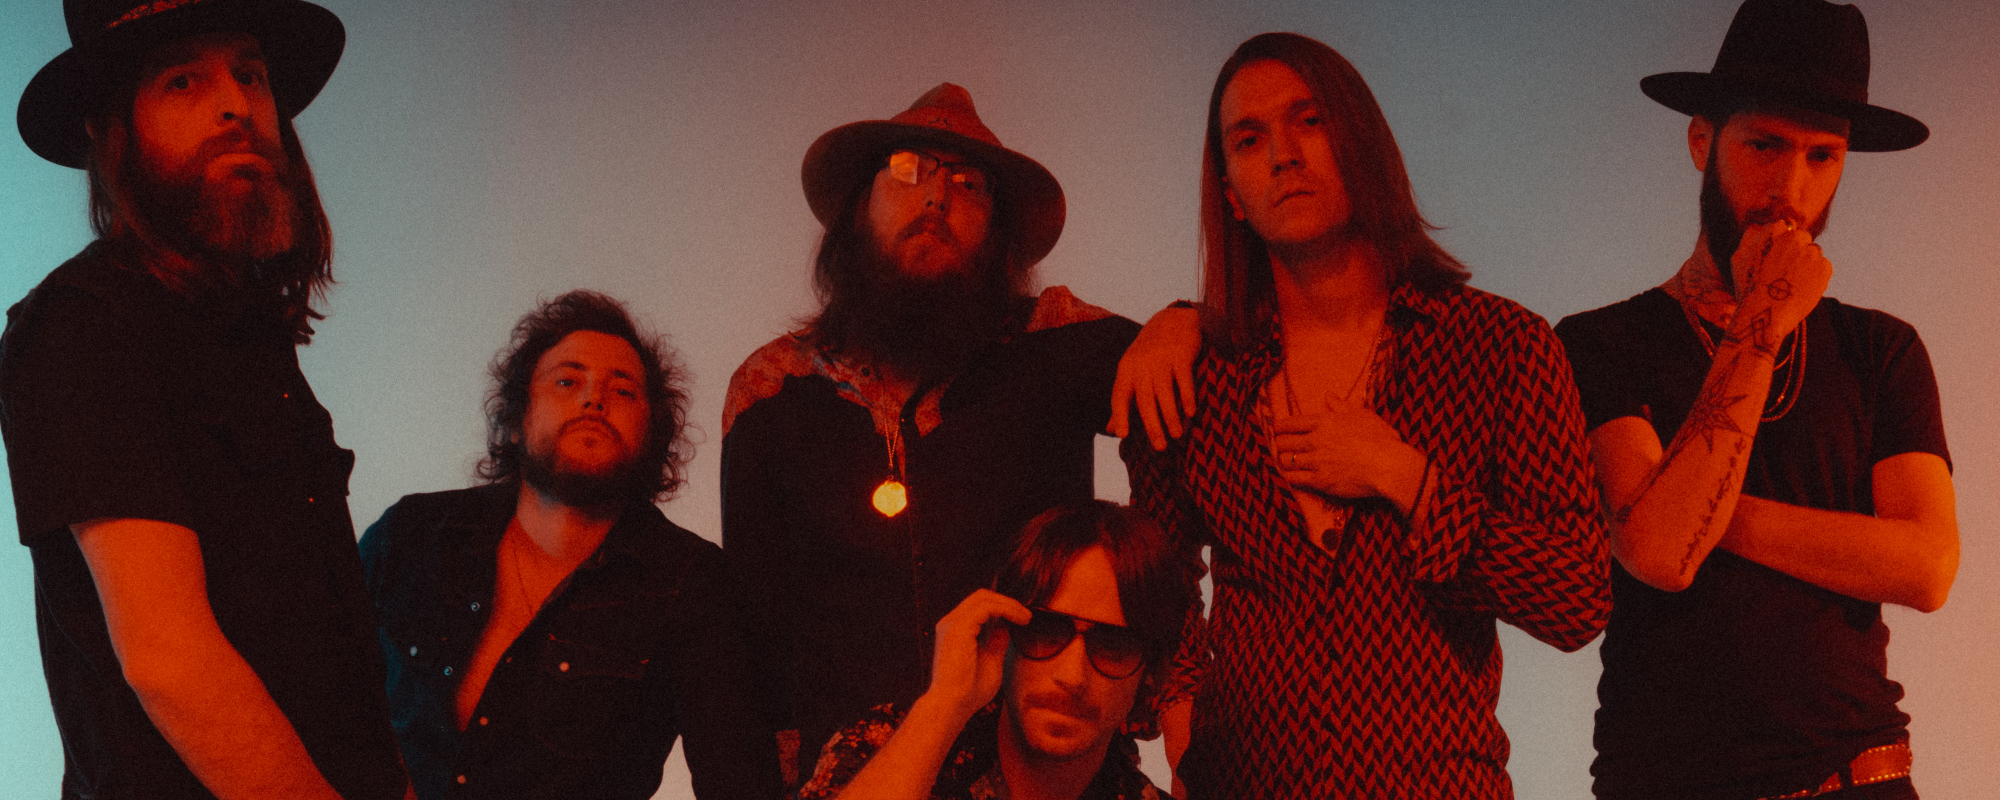 Whiskey Myers Once Again Raises Their Game on New Album